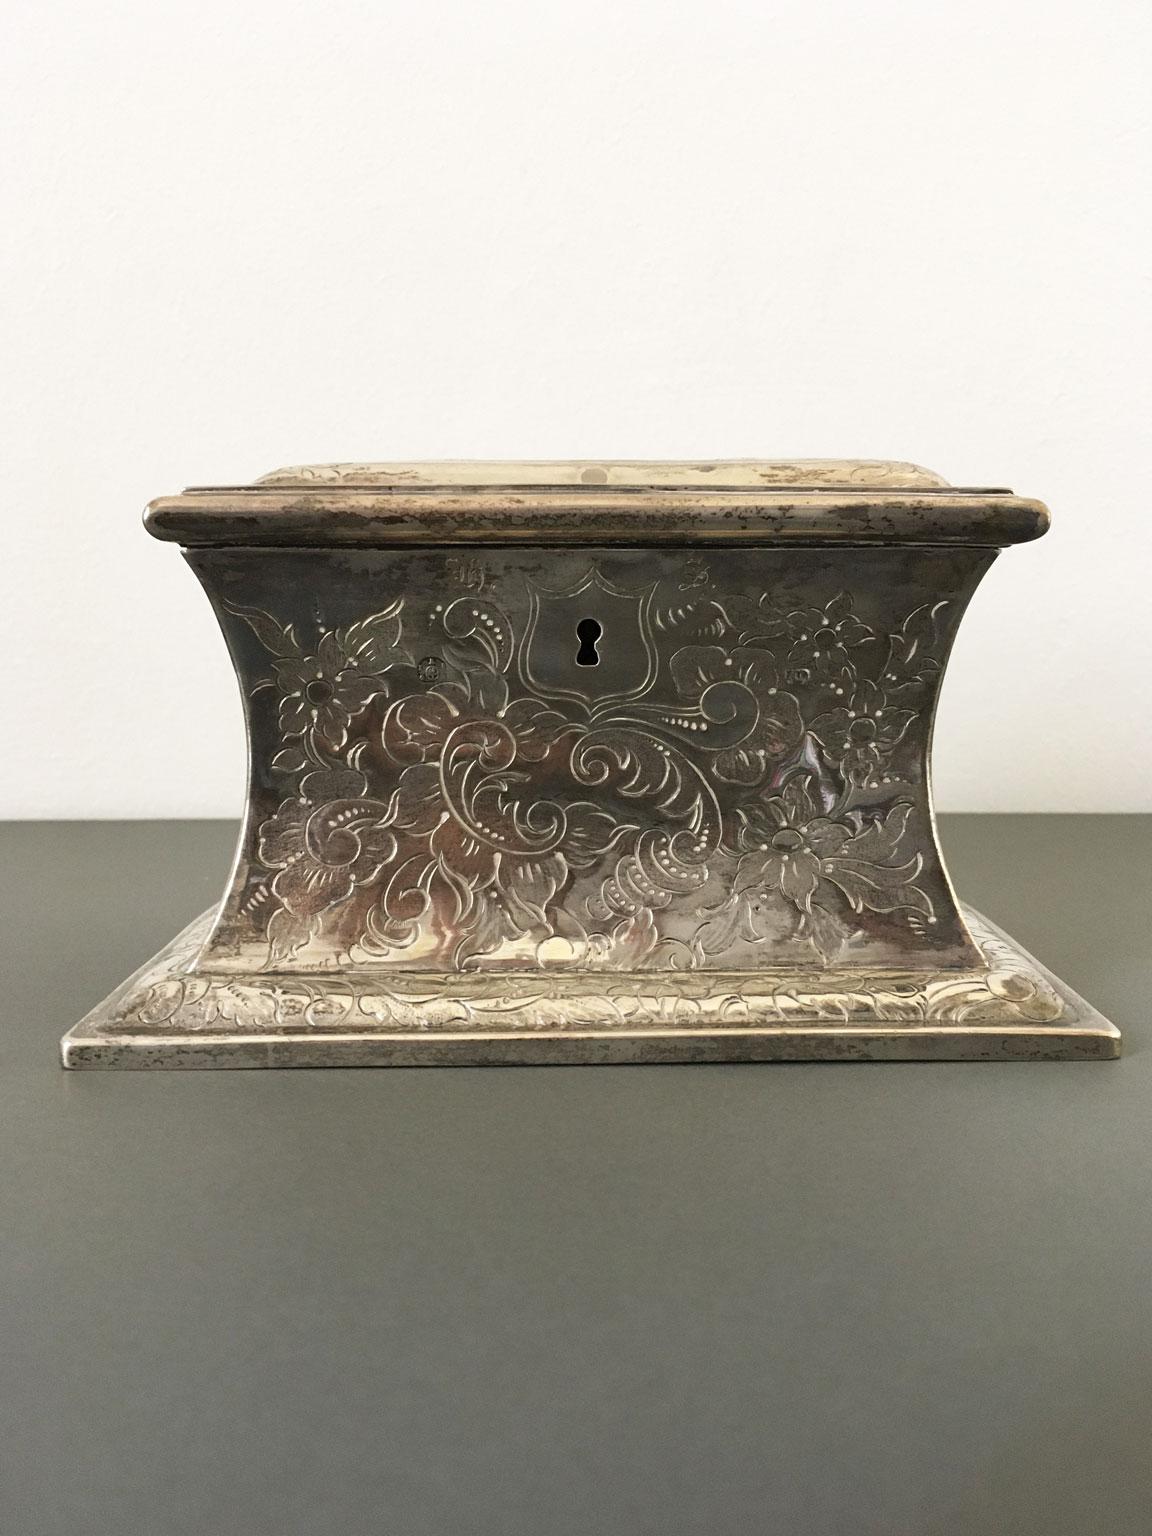 Mid-18th Century German Engraved Sterking Silver Box For Sale 5